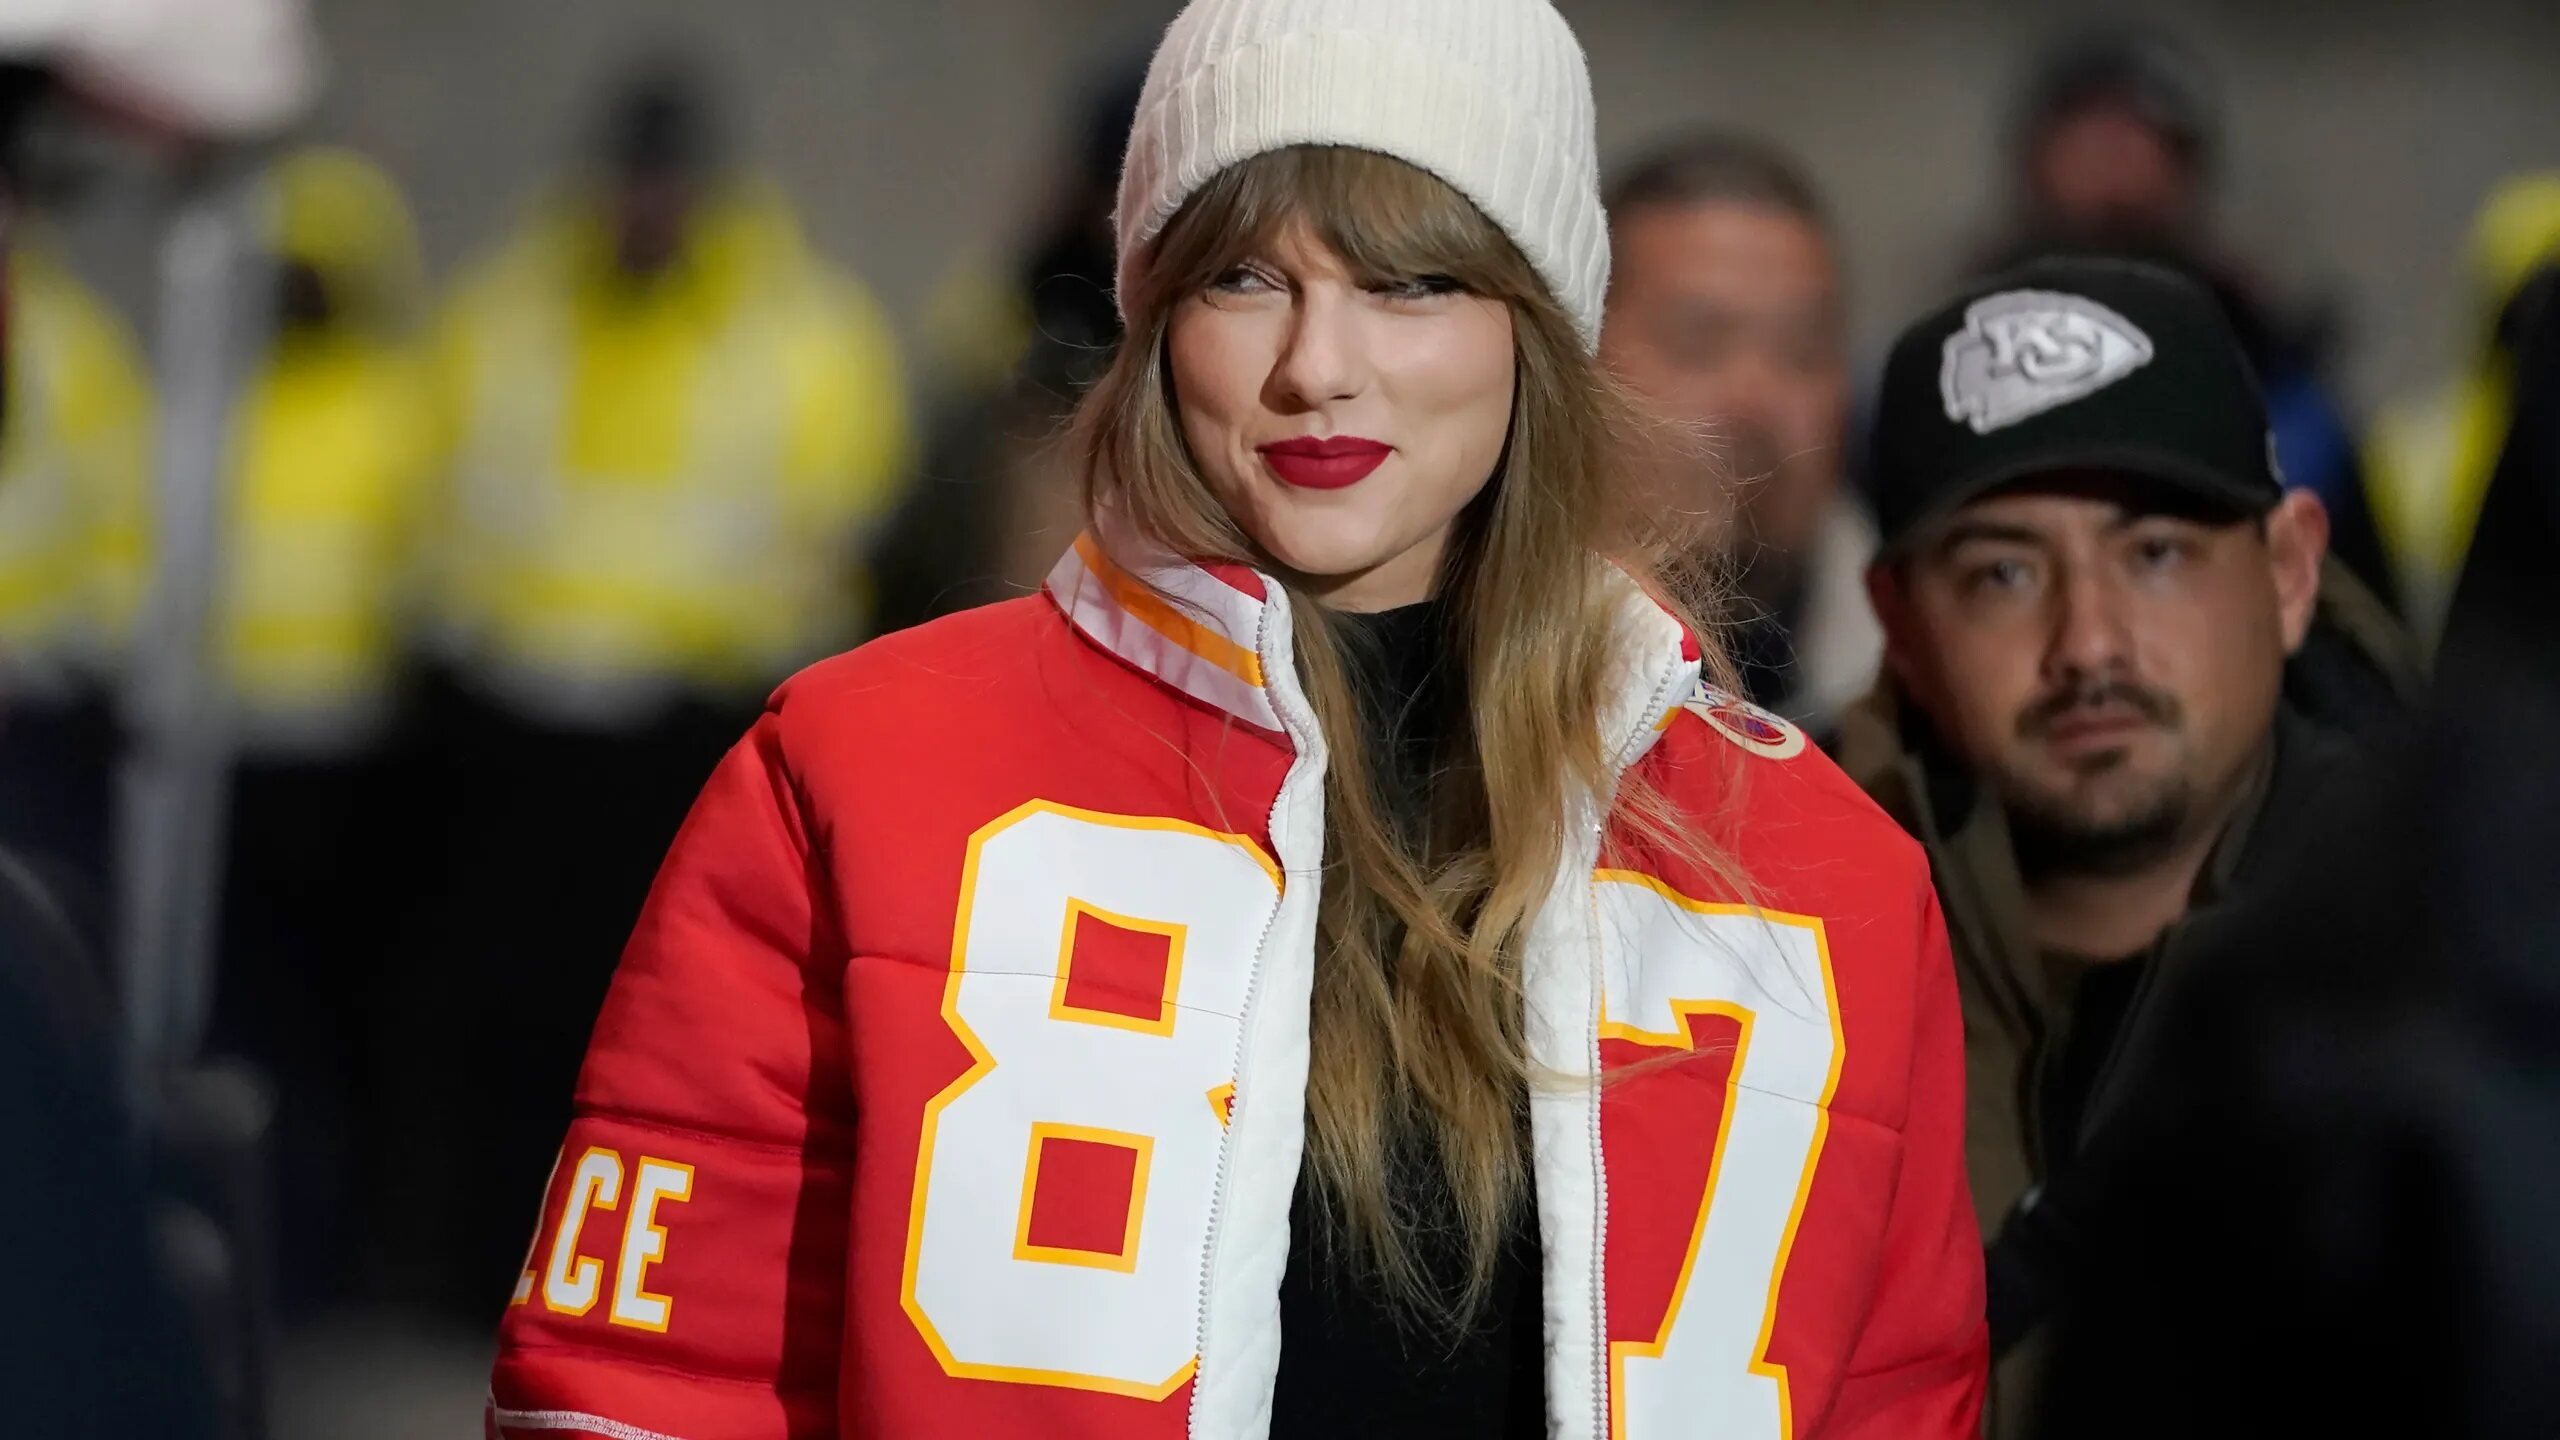 taylor-swift-mural-appears-in-maryland-before-chiefs-game